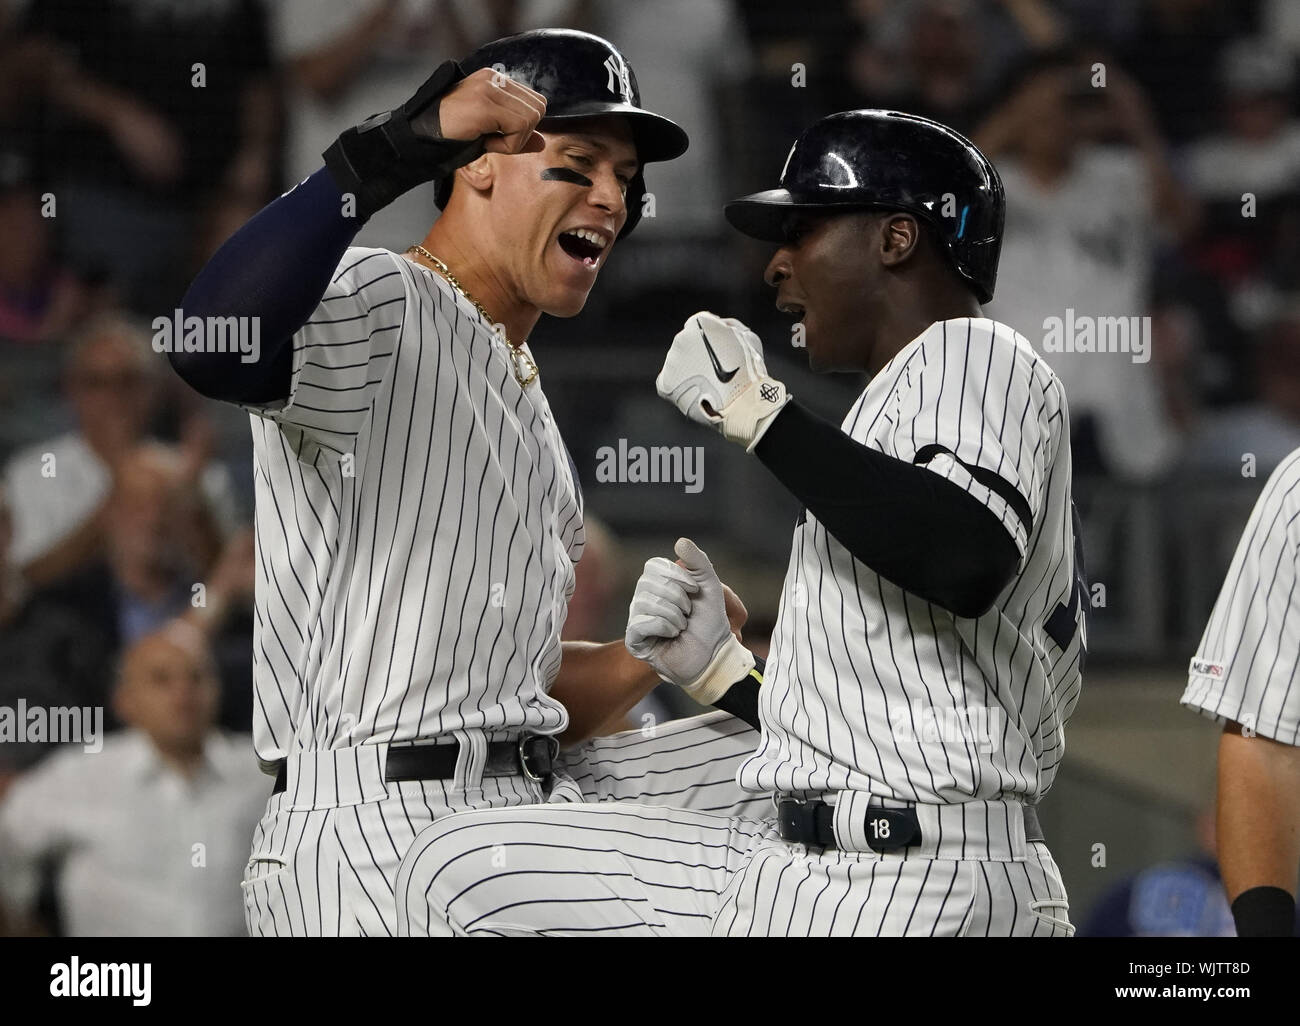 Bronx, United States. 03rd Sep, 2019. New York Yankees teammates Aaron Judge and Didi Gregorius celebrate at the plate after Gregorius' three-run home run against the Texas Rangers in the sixth inning at Yankee Stadium in New York City on Sunday, September 3, 2019. Photo by Ray Stubblebine/UPI Credit: UPI/Alamy Live News Stock Photo